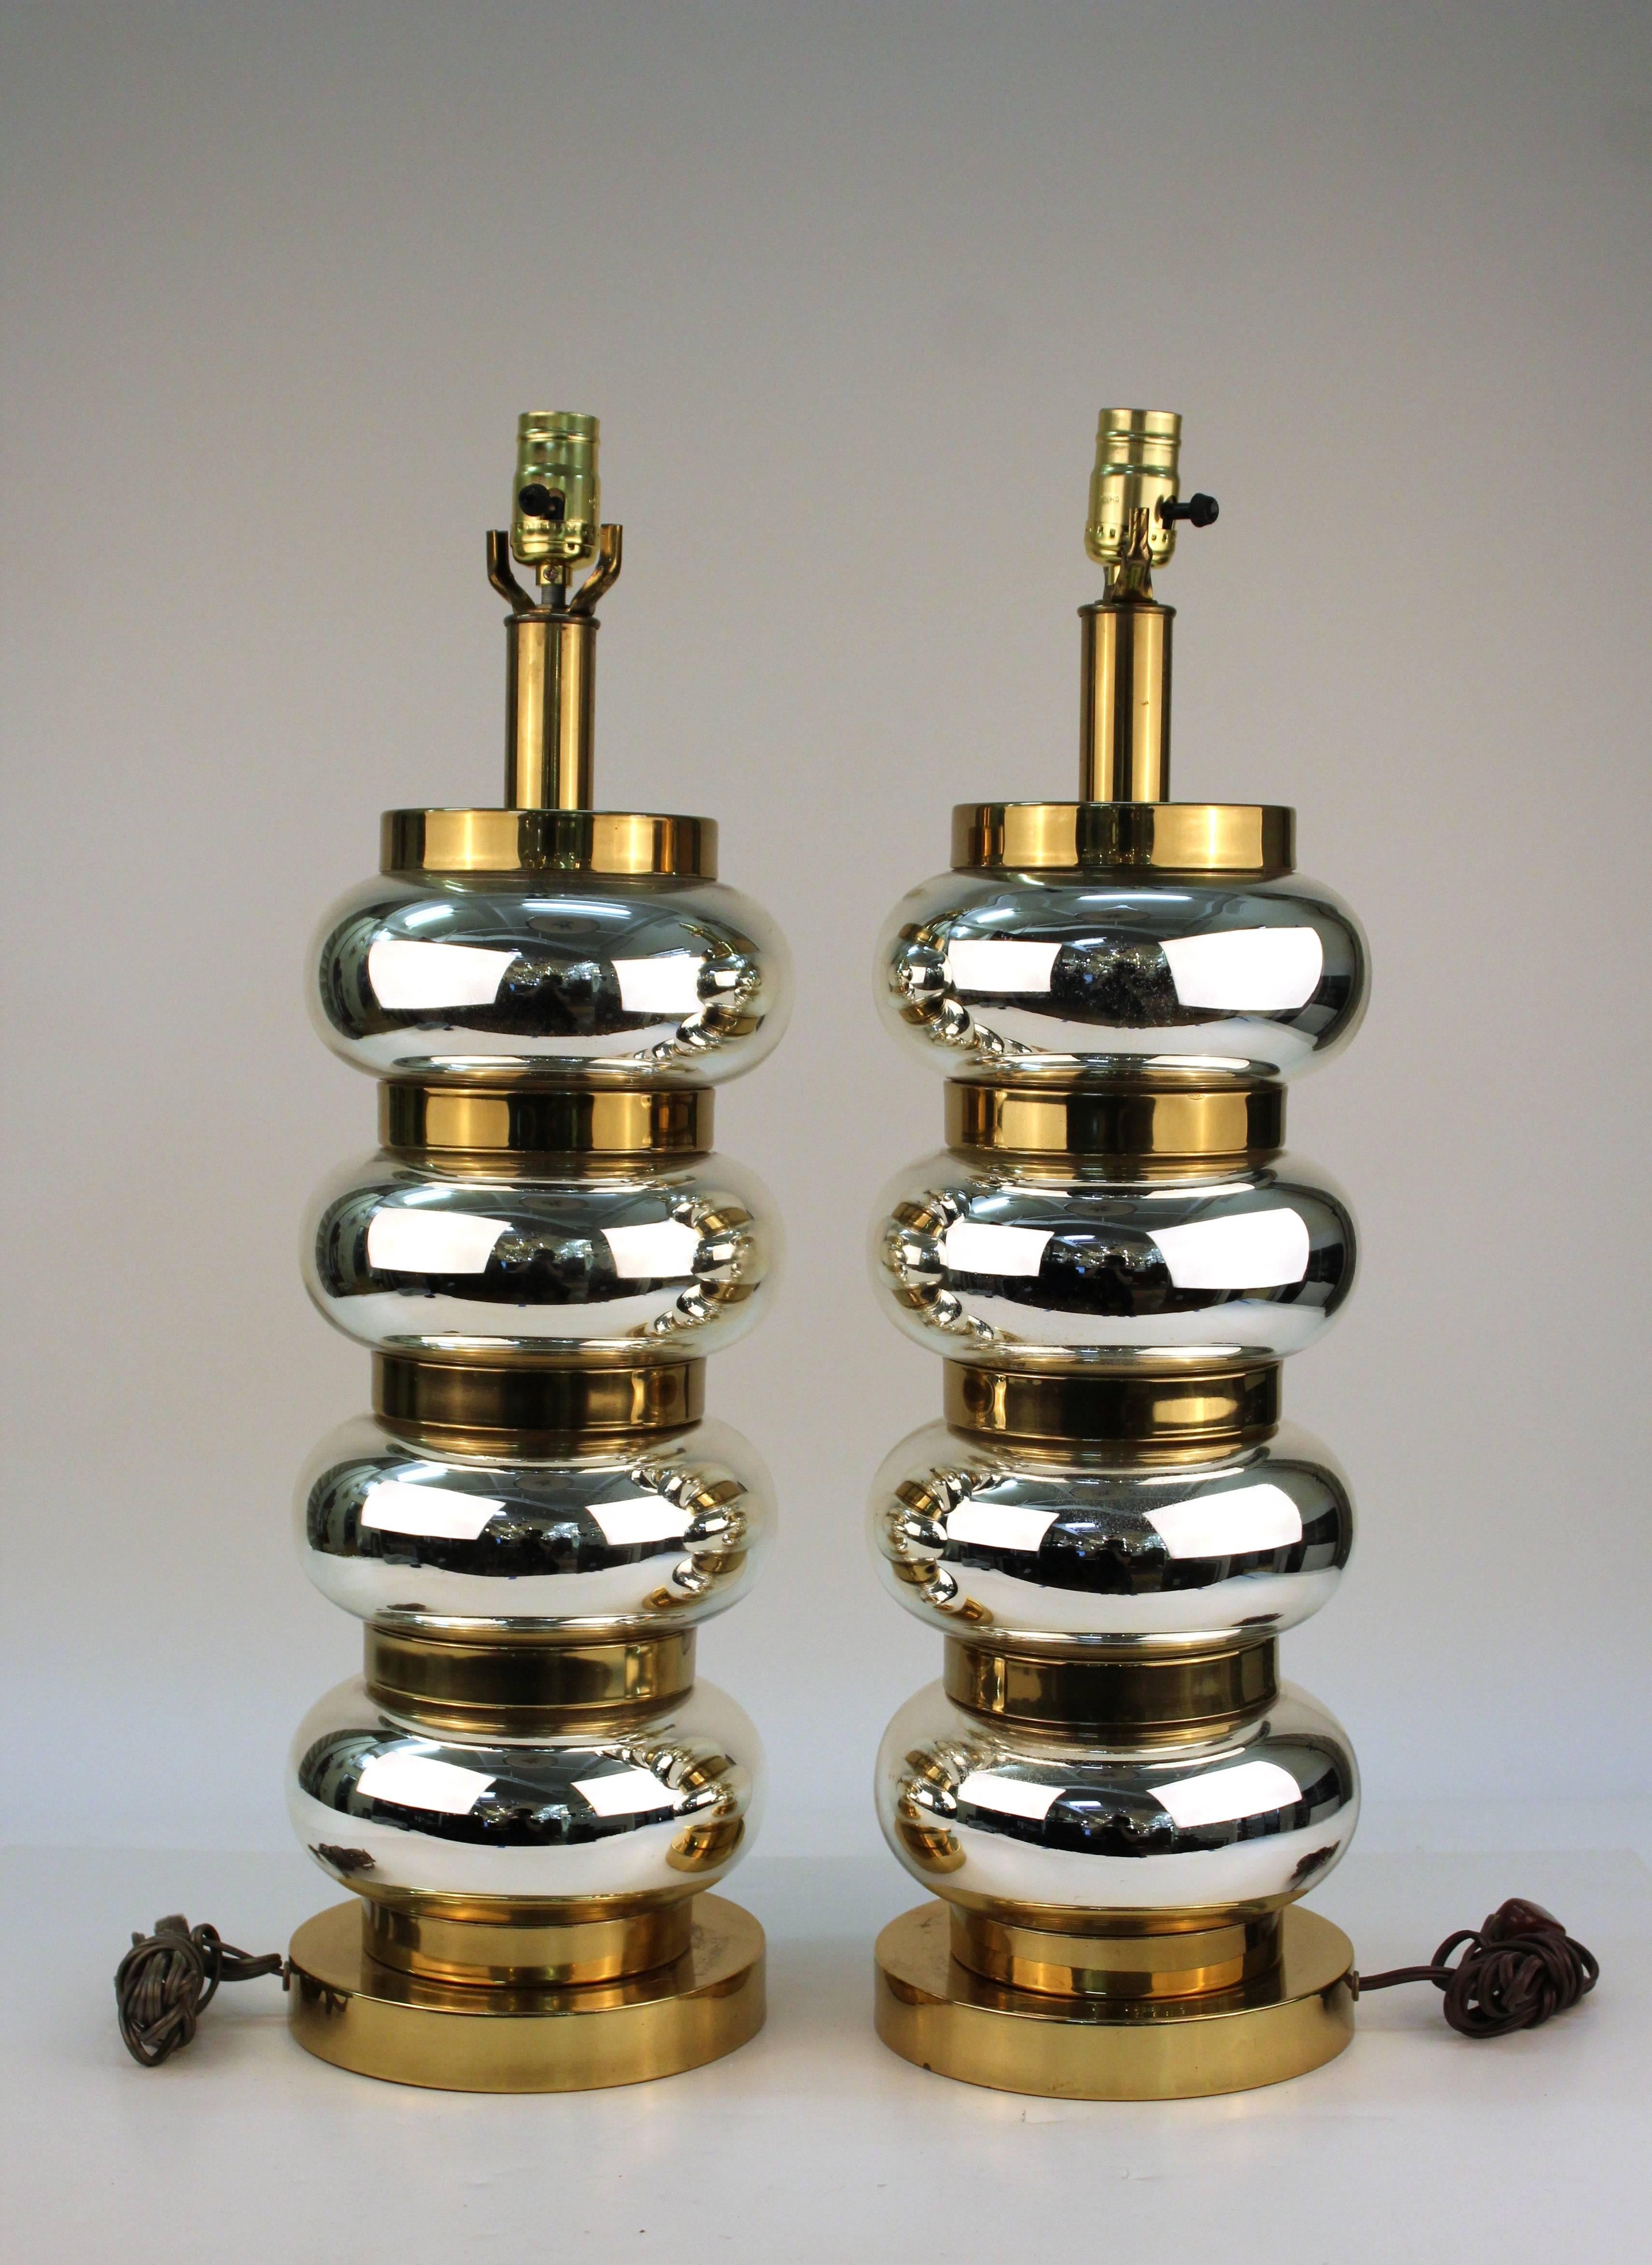 Pair of stacked bubble lamps in chrome. Features gold-tone accents and a polished finish. The lamps are in good condition.